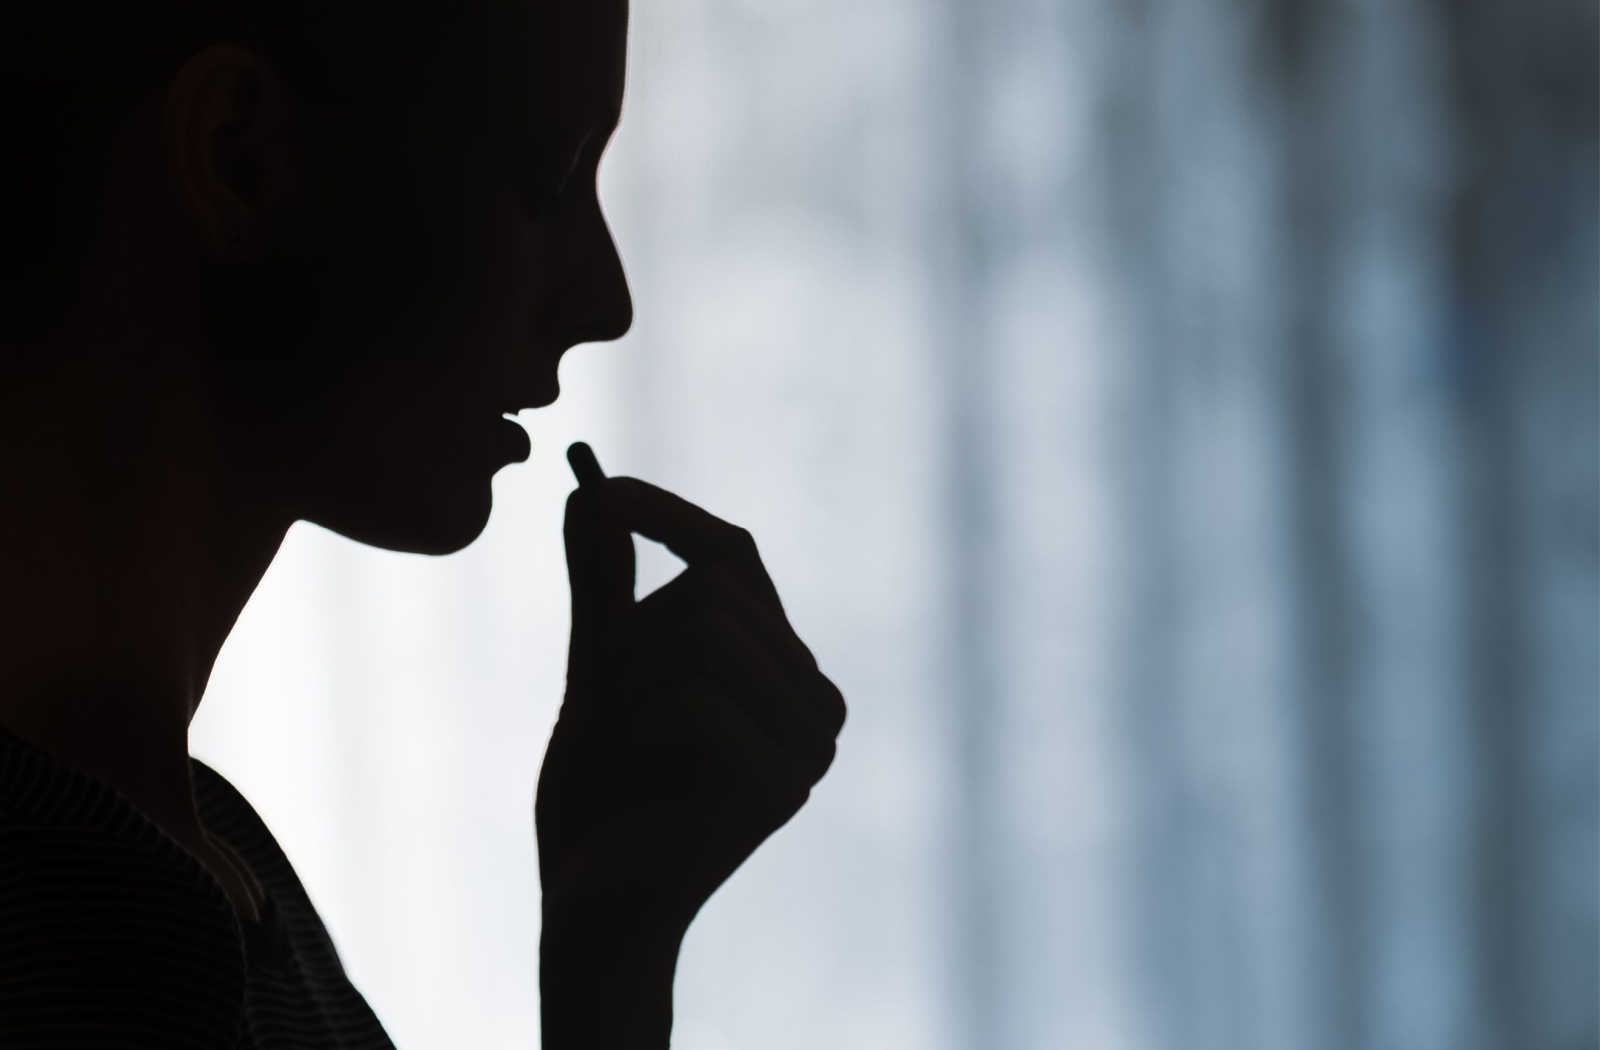 A dark, shadowy image of a person about to put a pill in their mouth.